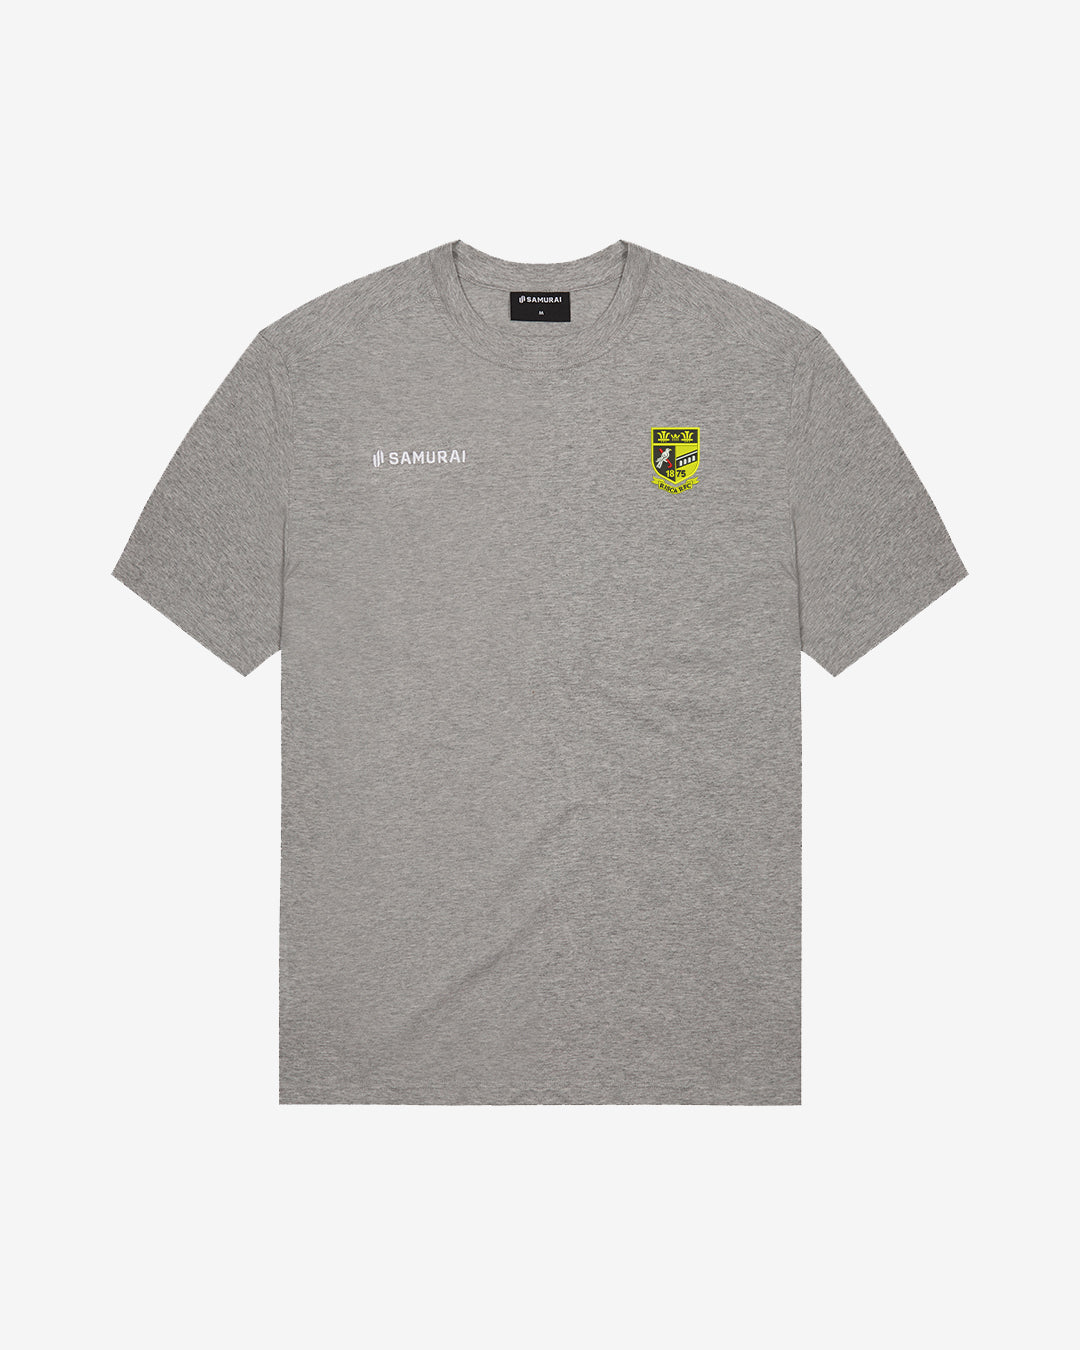 Risca RFC - EP:0110 - Cotton Touch Tee - Grey